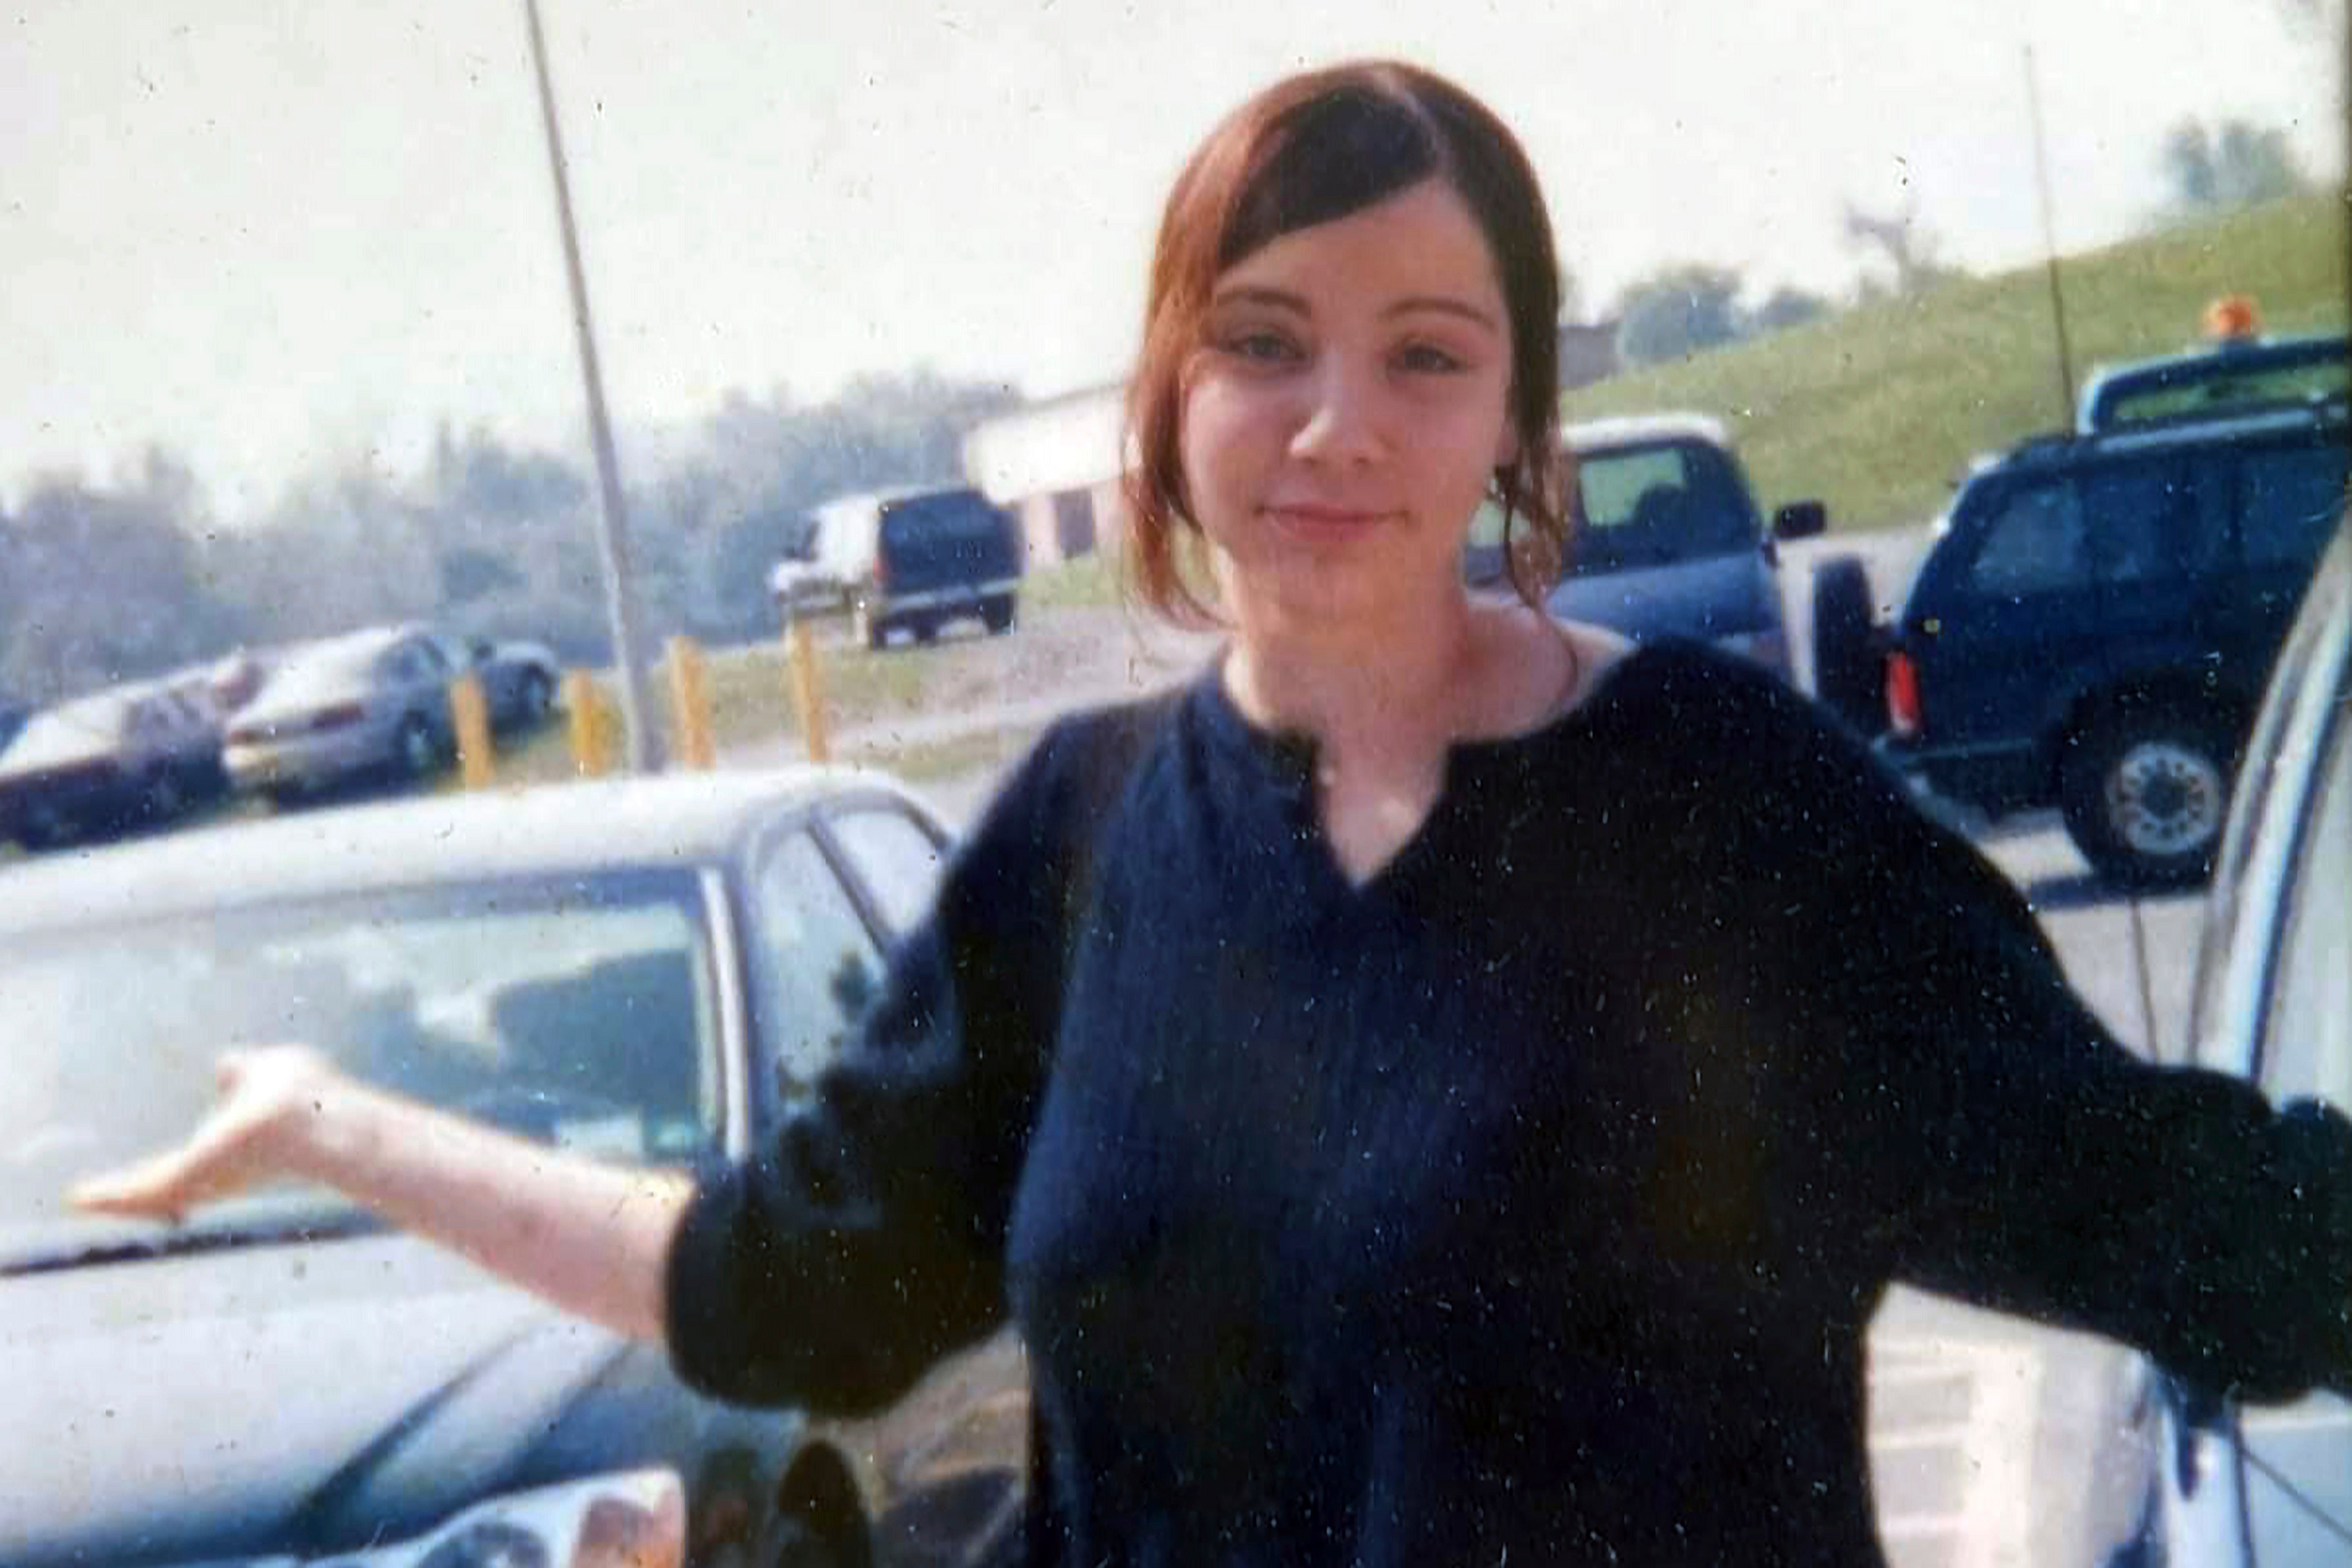 Jessica Taylor, 20, went missing in 2003; her partial remains were discovered in two separate locations on Long Island. Heuermann has not been charged in connection with her death